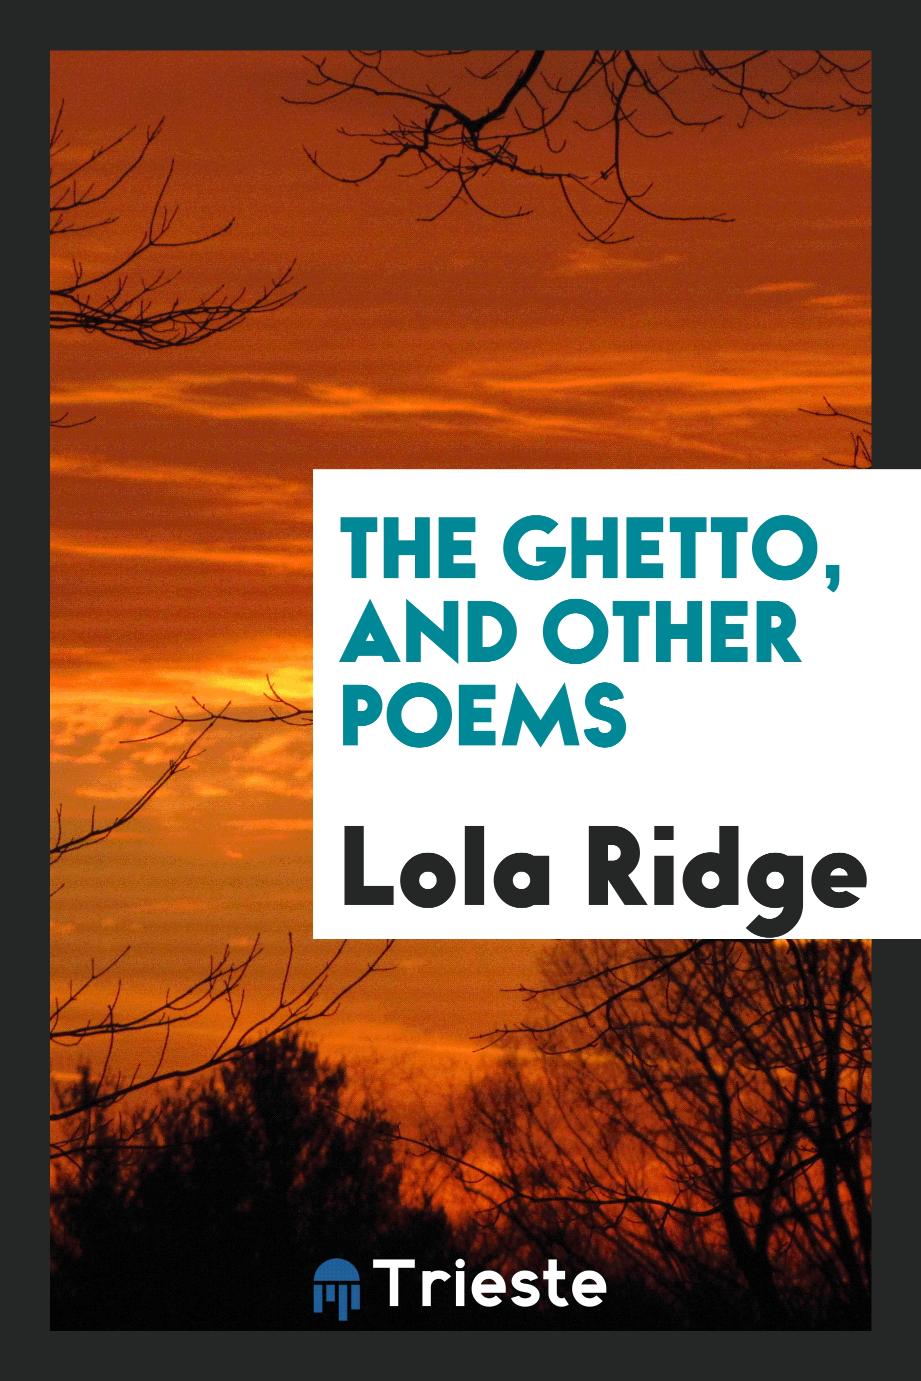 The Ghetto, and other poems